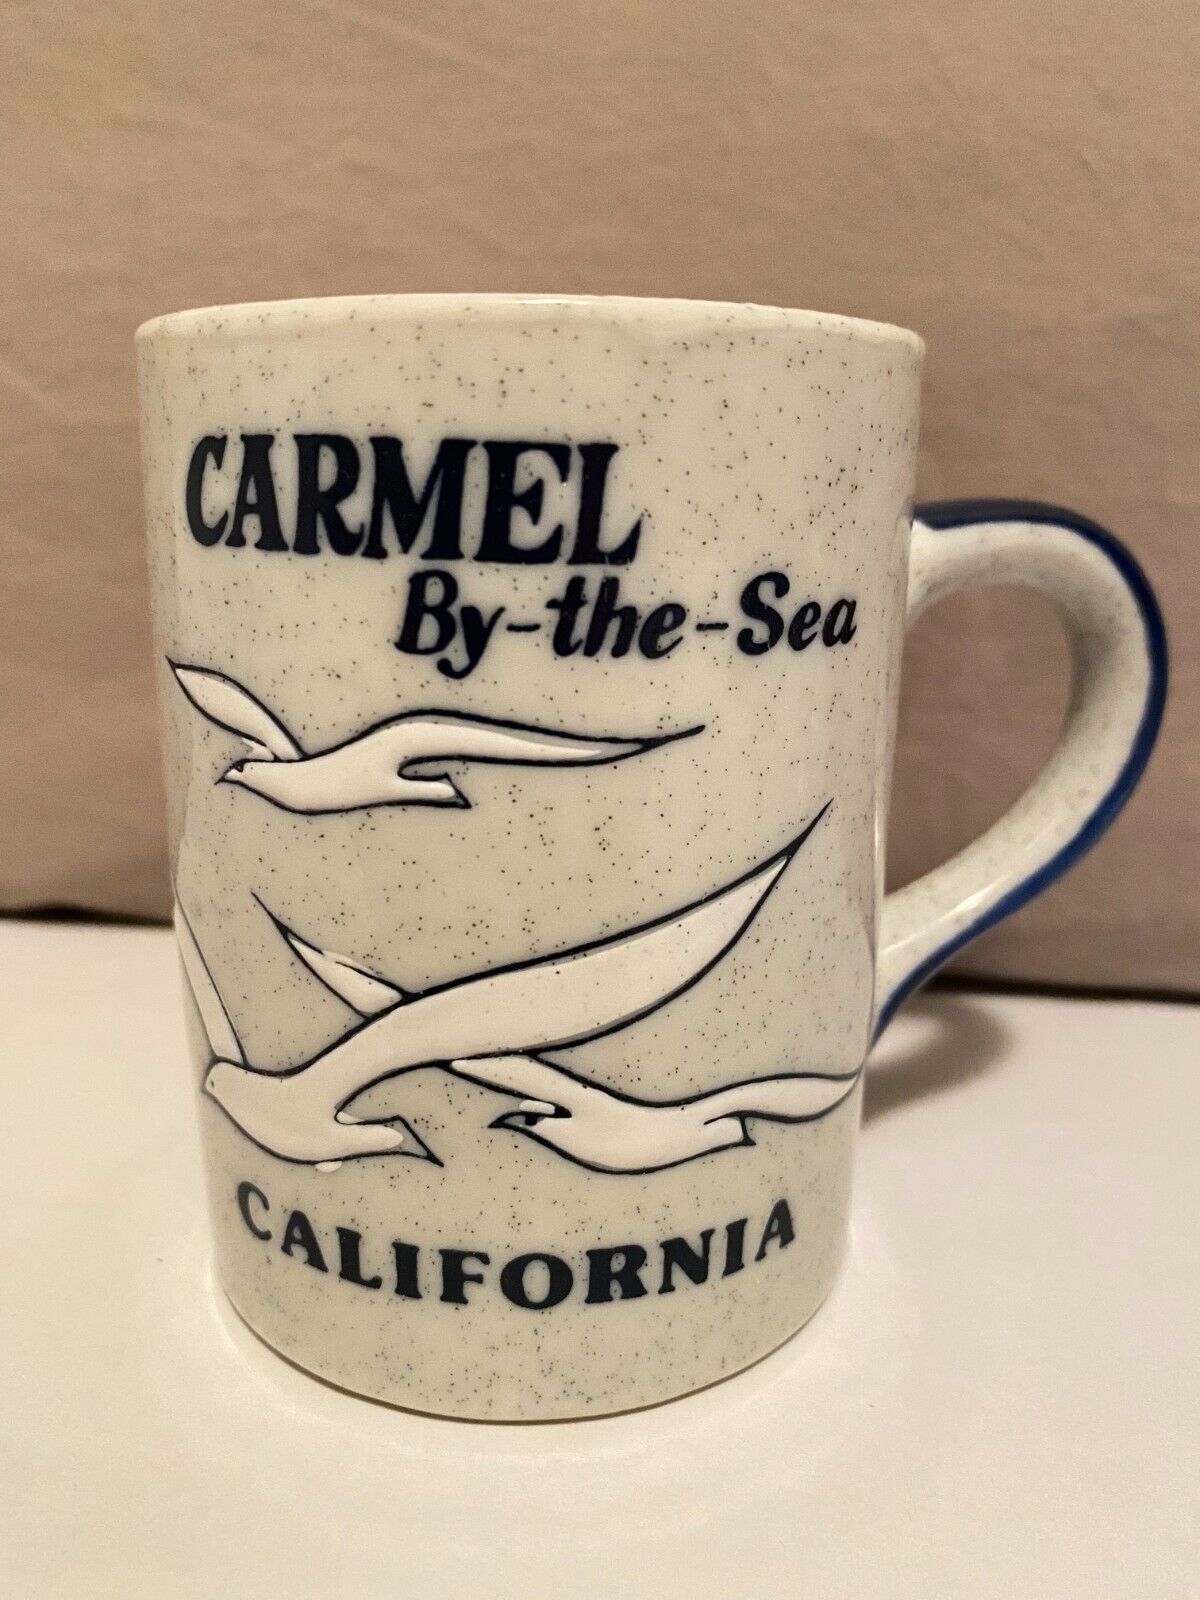 Vintage Souvenir Coffee Cup Carmel By The Sea California Seagulls Made in Japan